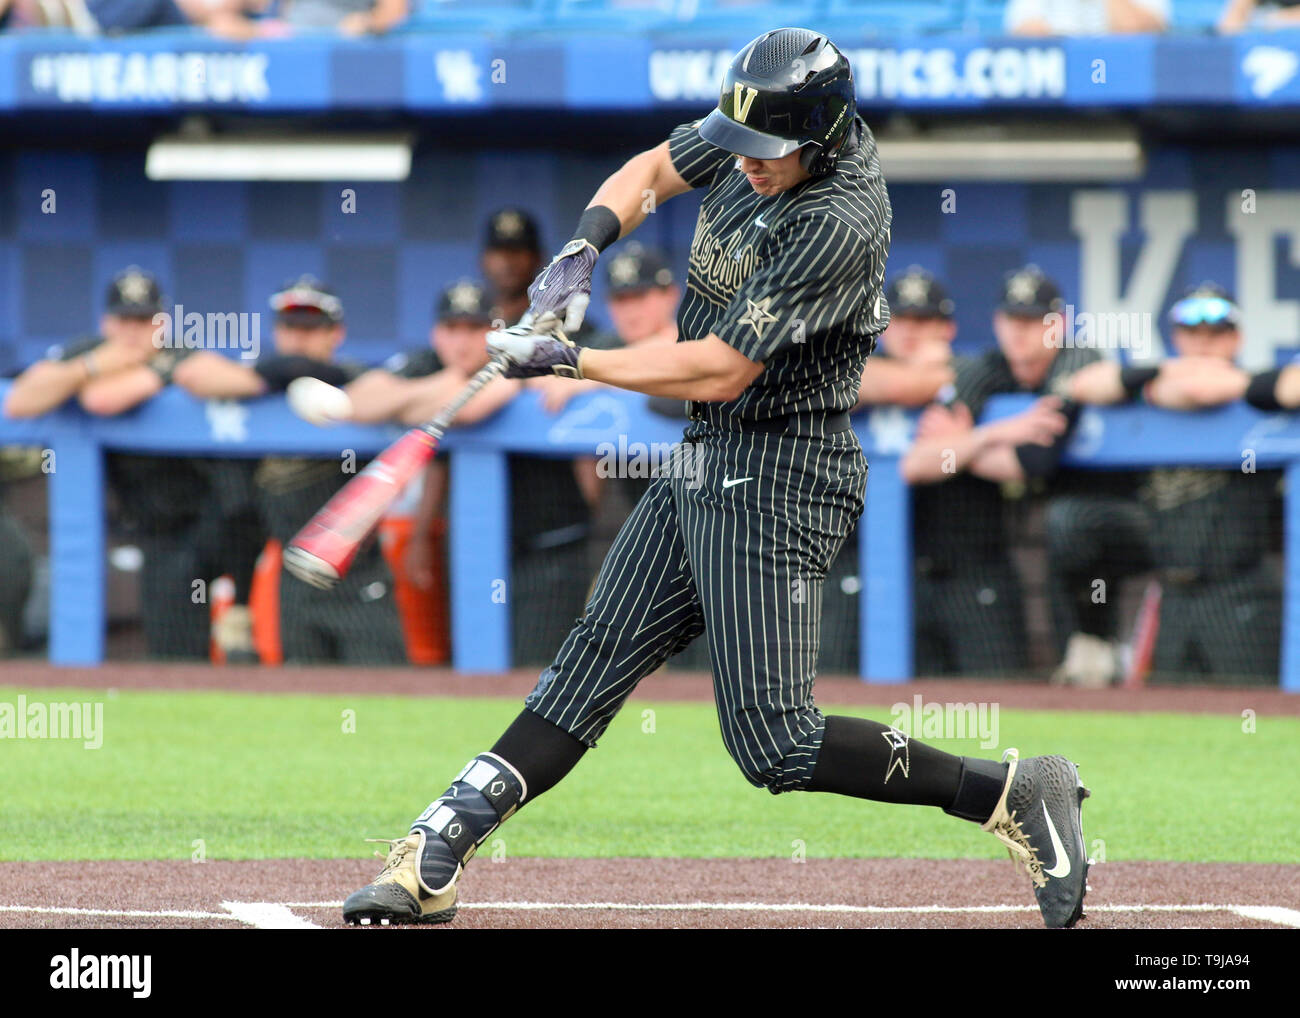 Lexington, KY, USA. 17th May, 2019. Vanderbilt's JJ Bleday swings during a game between the Kentucky Wildcats and the Vanderbilt Commodores at Kentucky Pride Park in Lexington, KY. Kevin Schultz/CSM/Alamy Live News Stock Photo